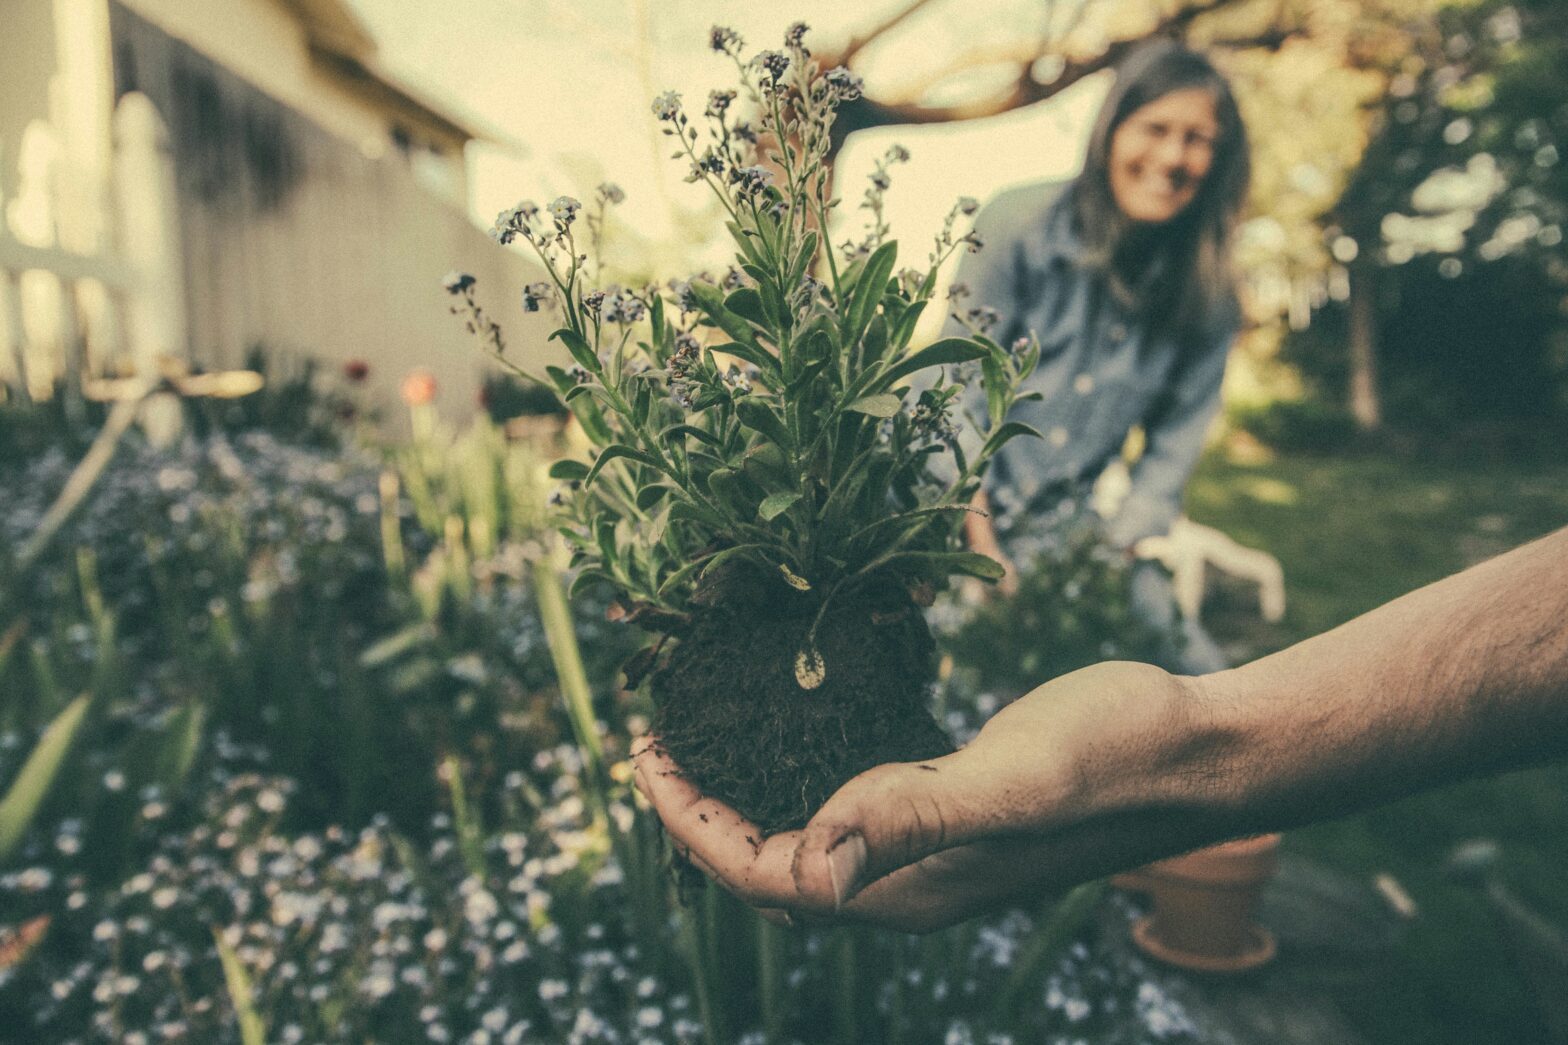 A hand holding a plant start in front of a garden with a woman smiling in the background